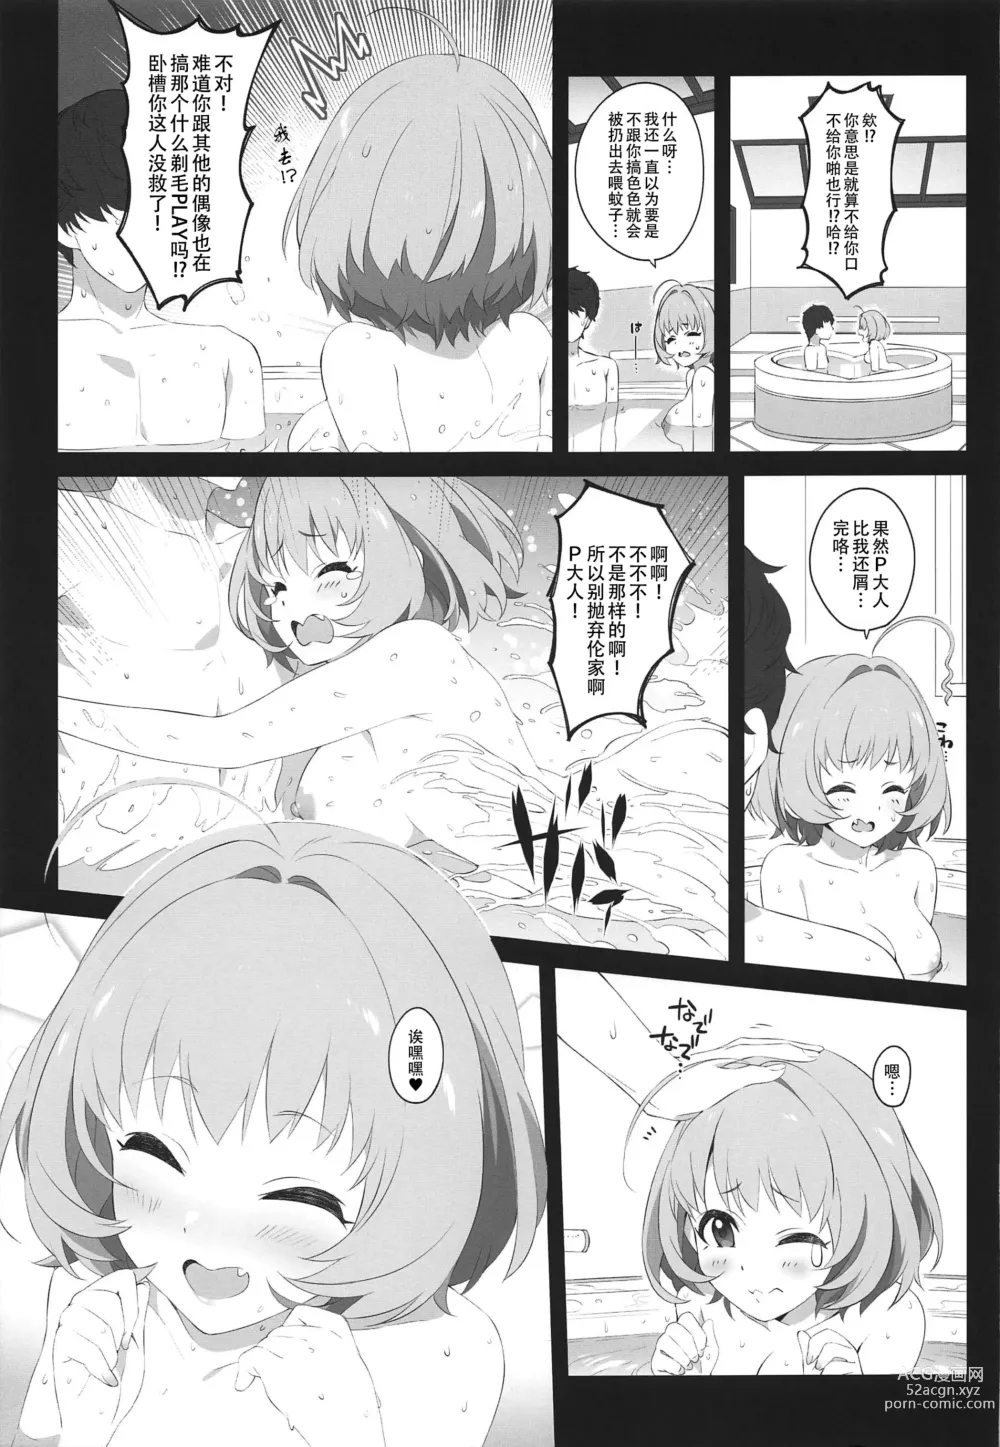 Page 27 of doujinshi Three stars have a dream with sparkles.